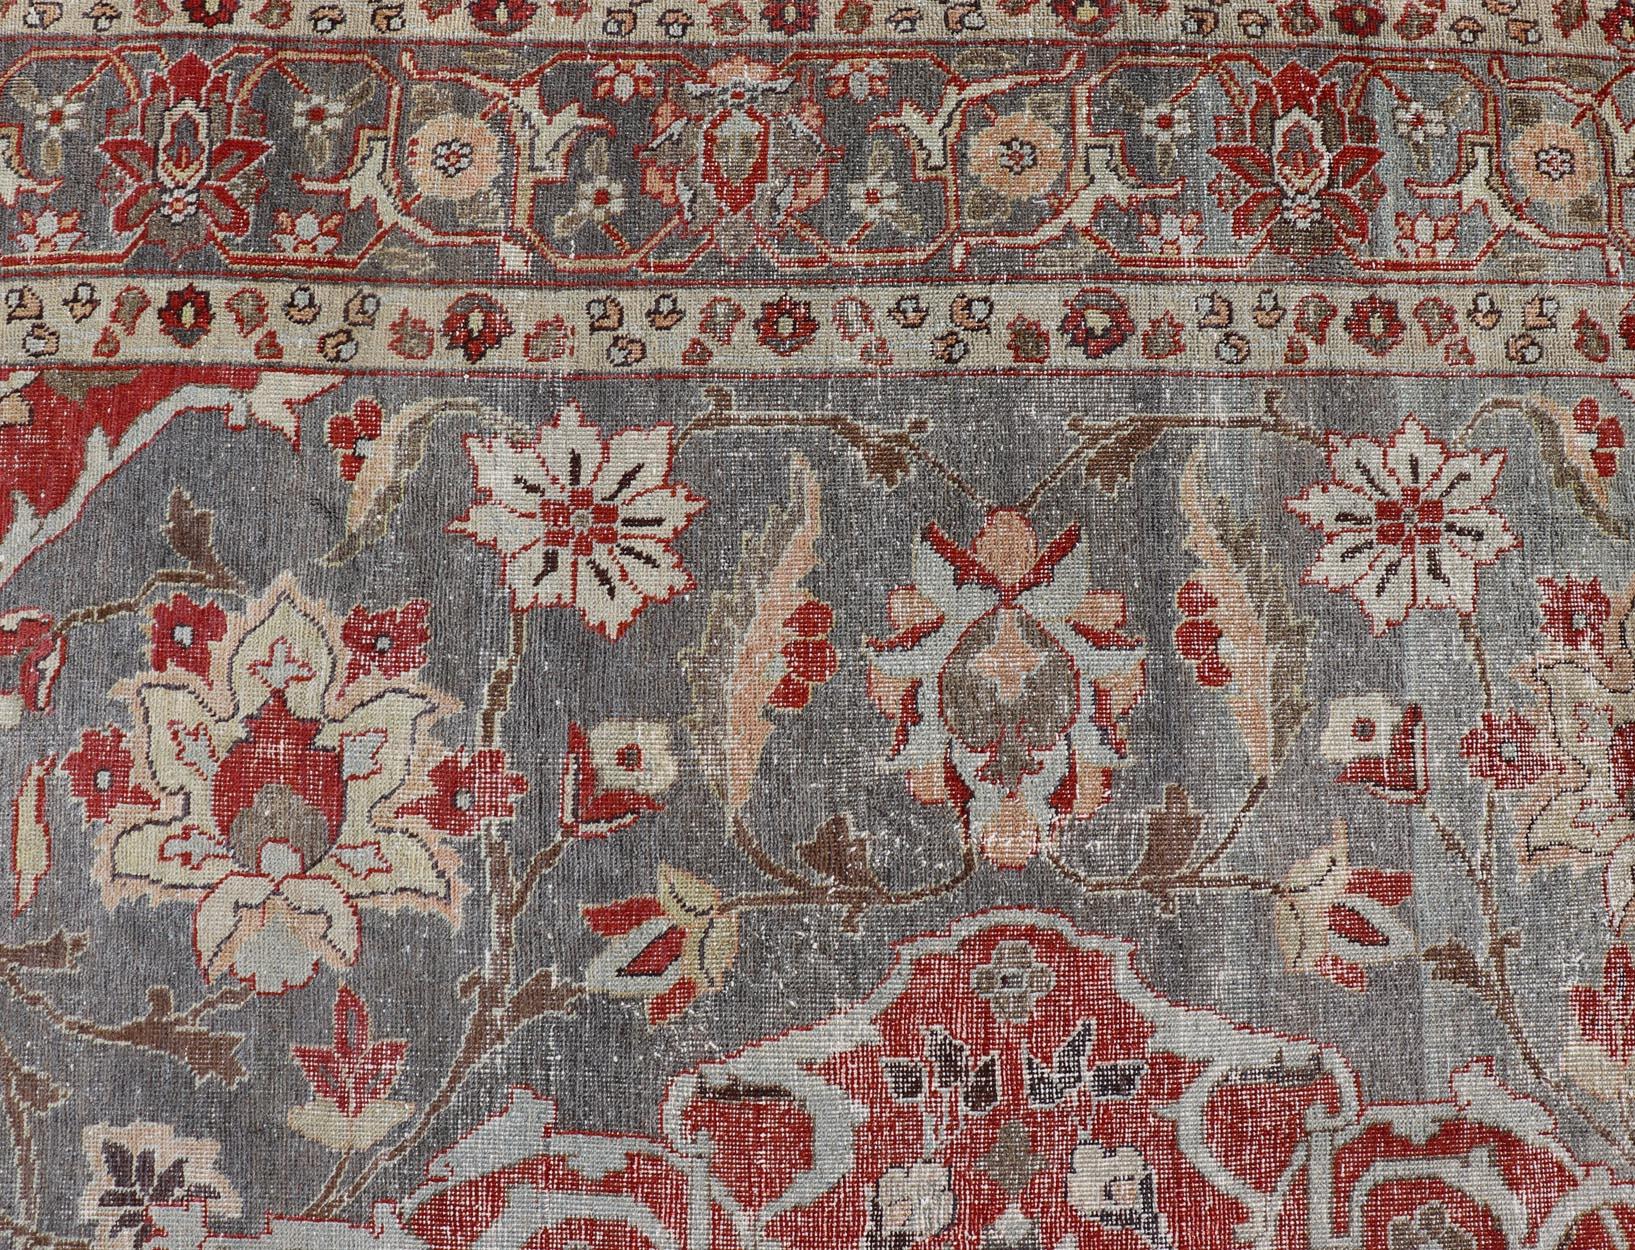 Antique Persian Tabriz Rug with Floral Medallion Design in Tan, Red, and Lt Blue For Sale 3